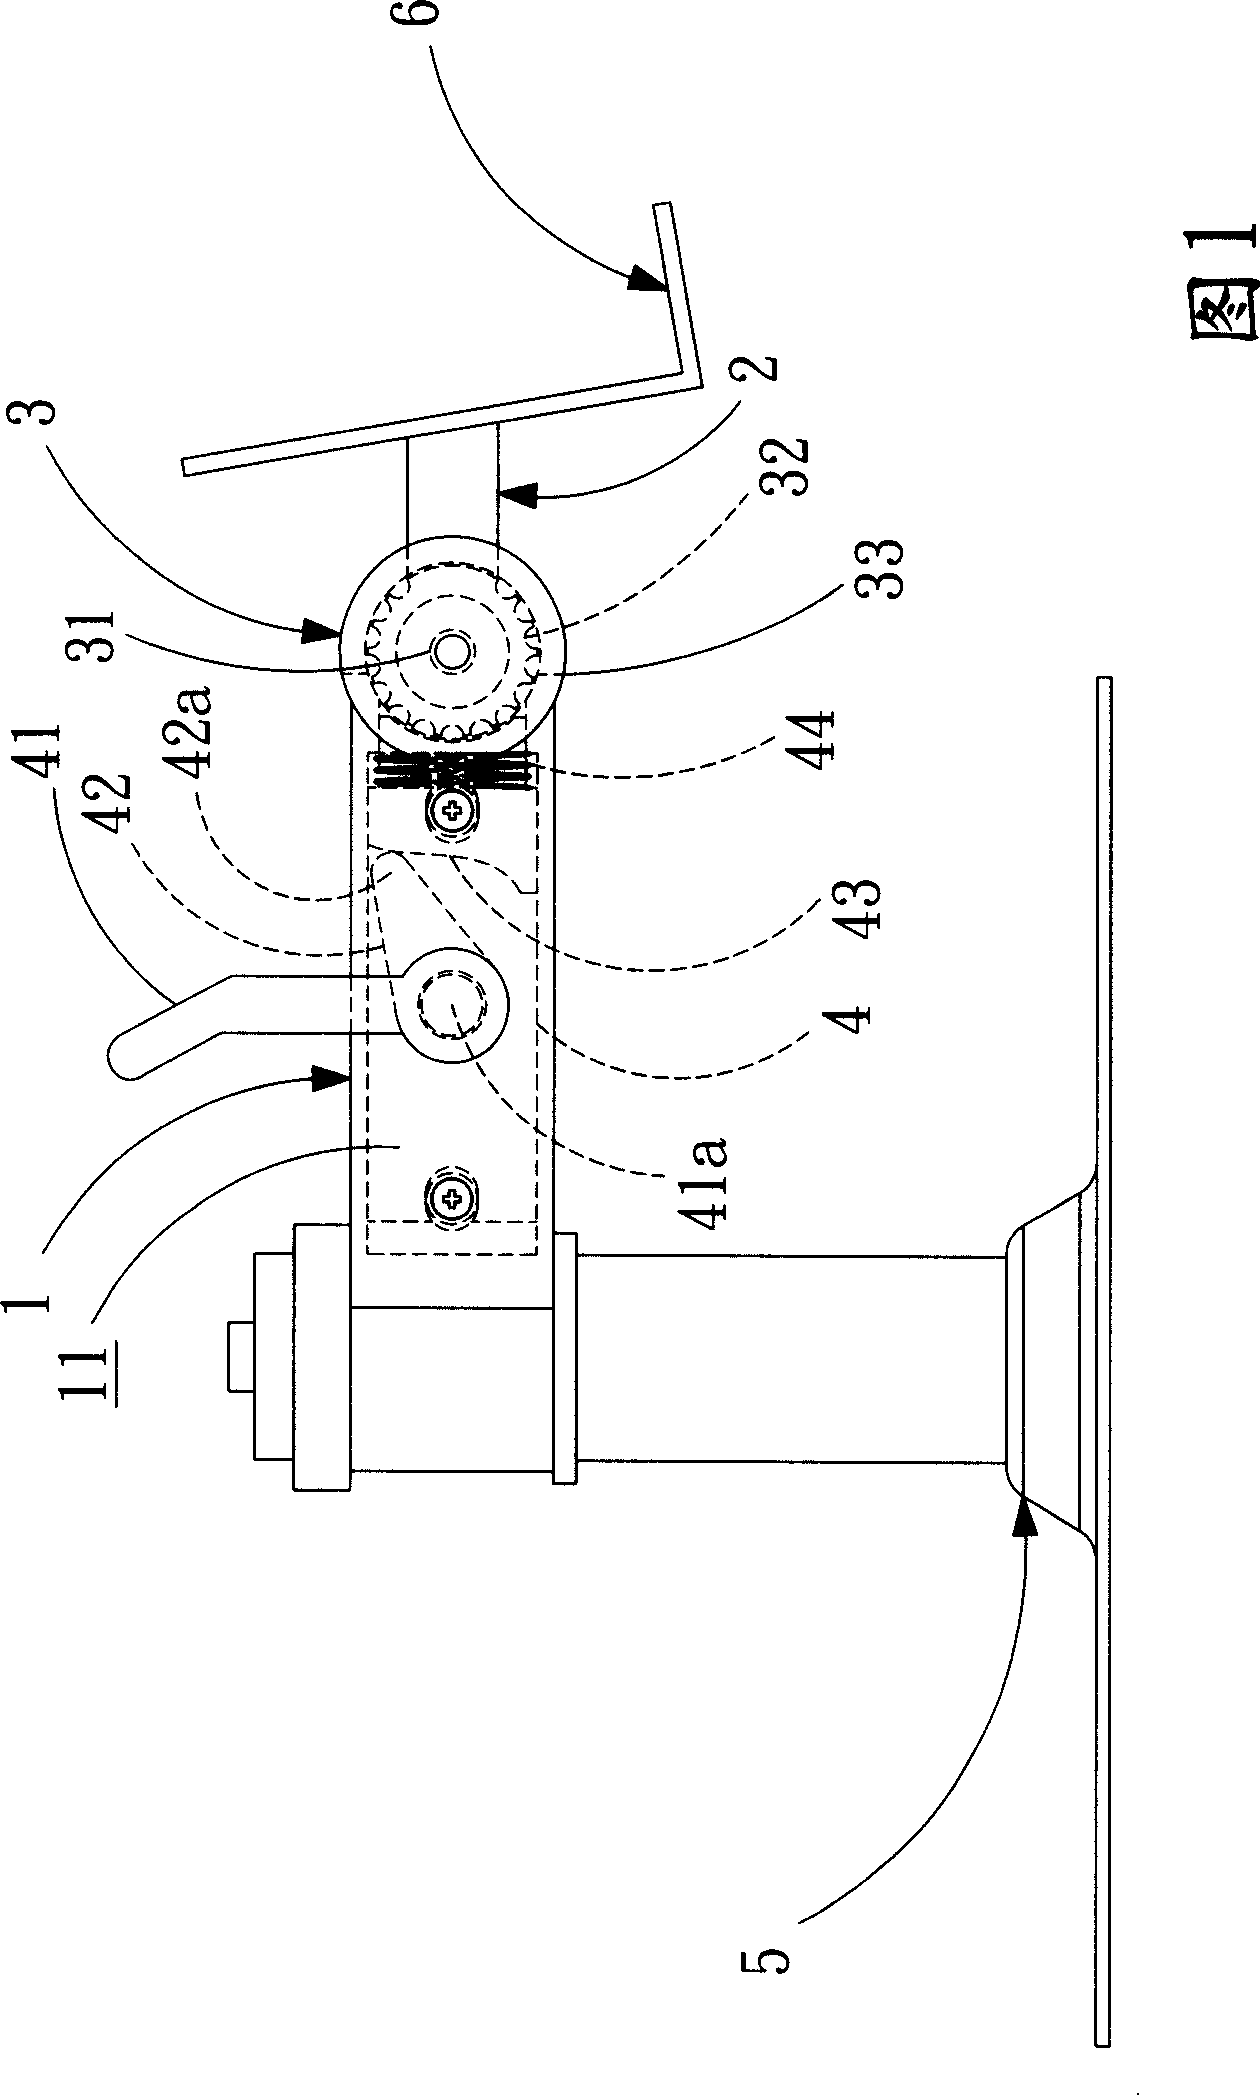 Electronic device fixed rack structure